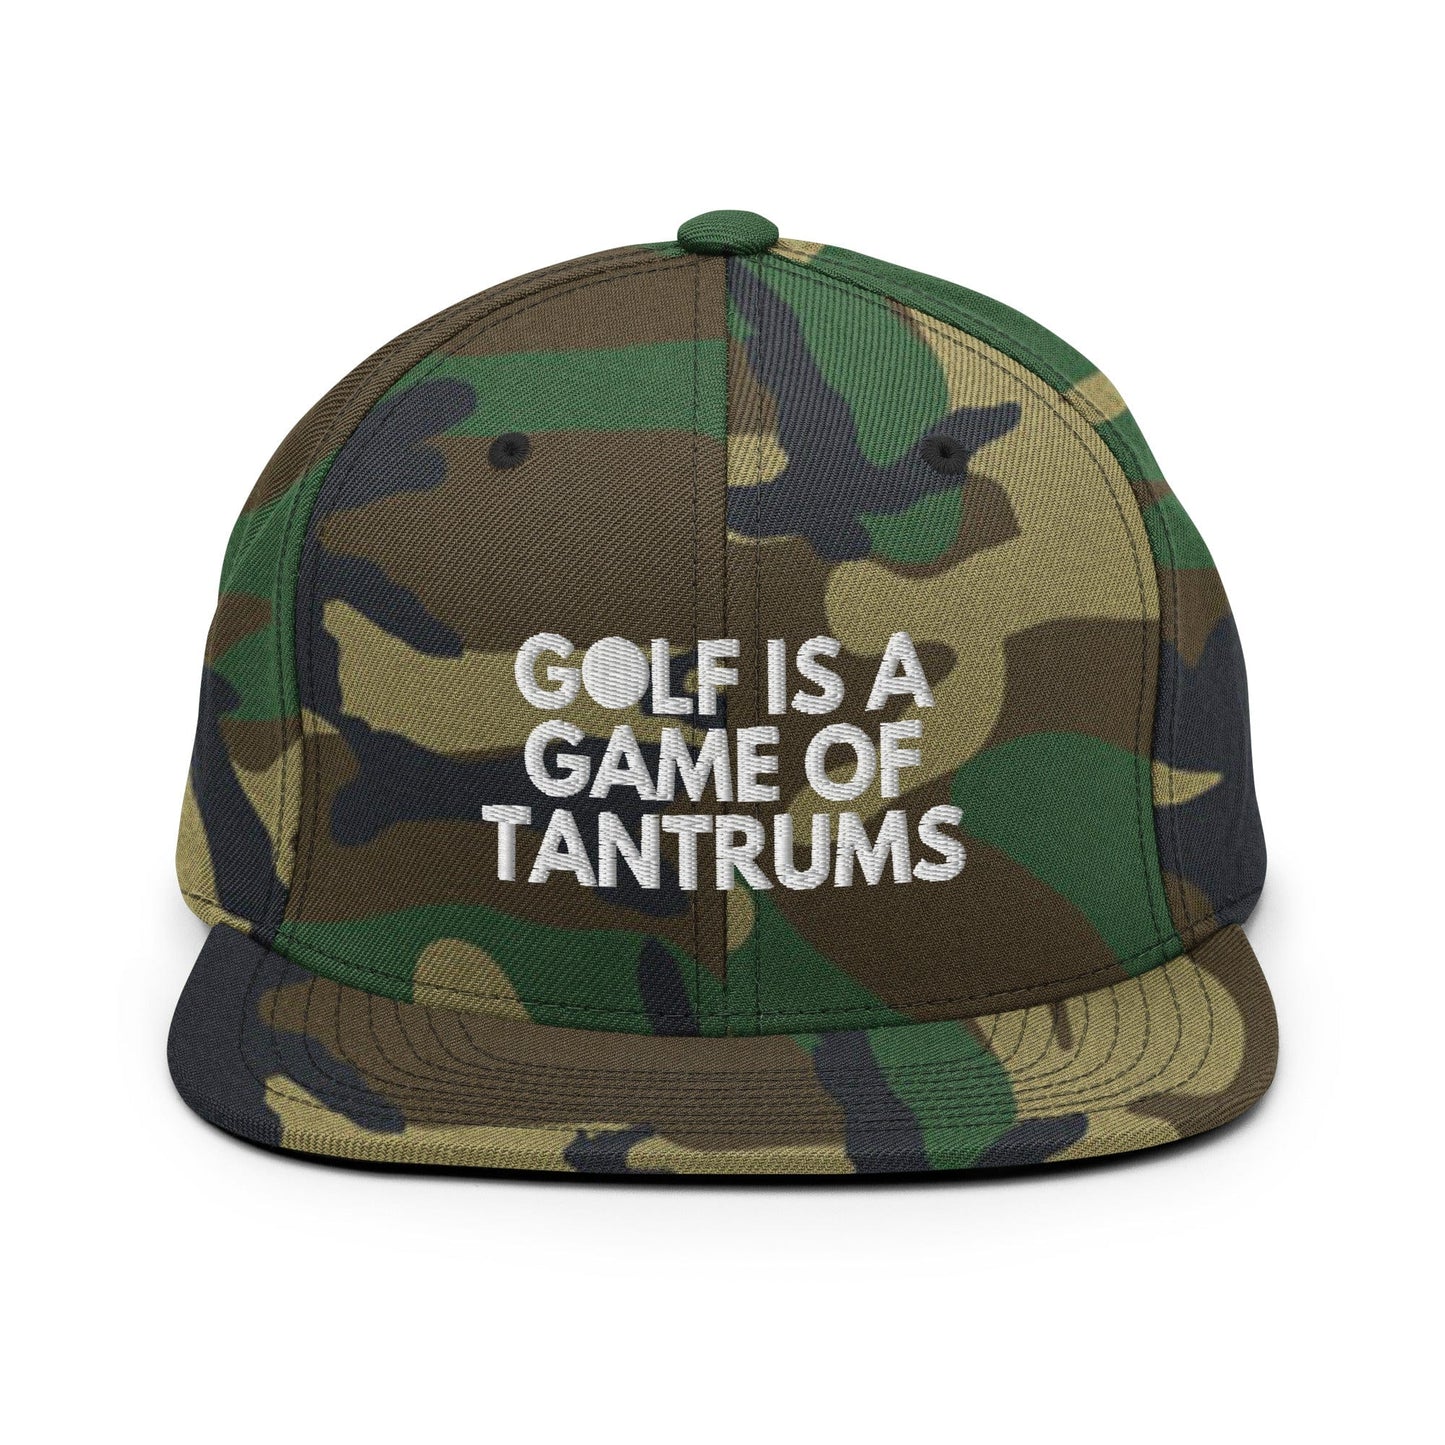 Funny Golfer Gifts  Snapback Hat Green Camo Golf Is A Game Of Tantrums Hat Snapback Hat